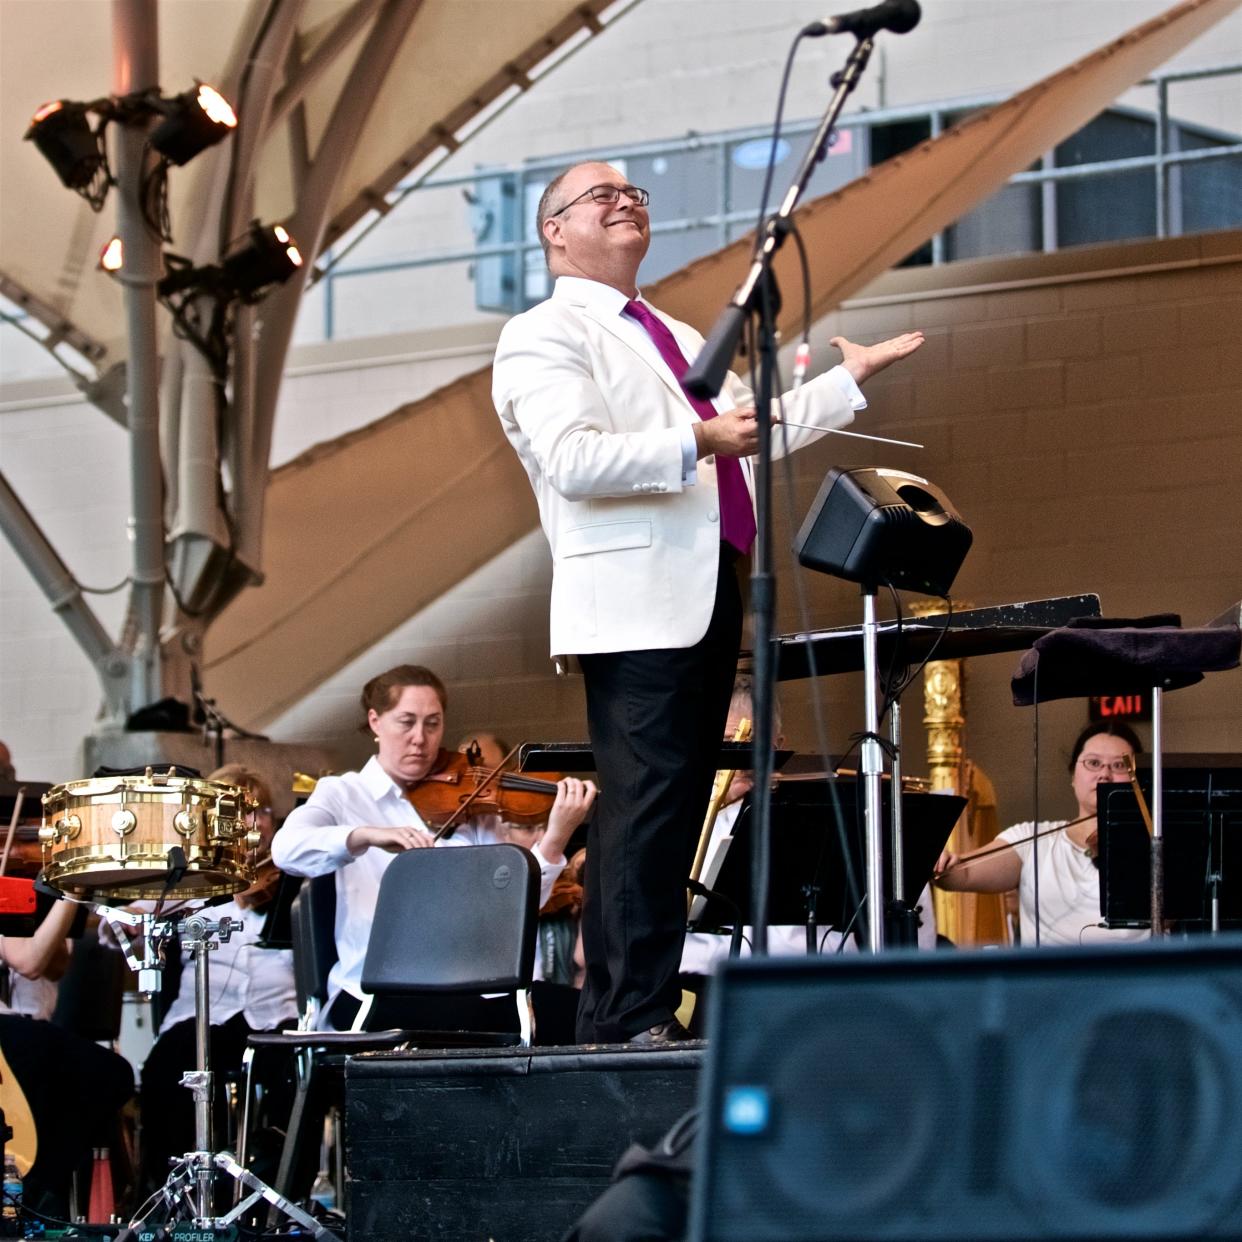 Columbus Symphony Principal Pops Conductor Stuart Chafetz will lead concerts over the summer as part of Picnic With the Pops, June 18-July 30.